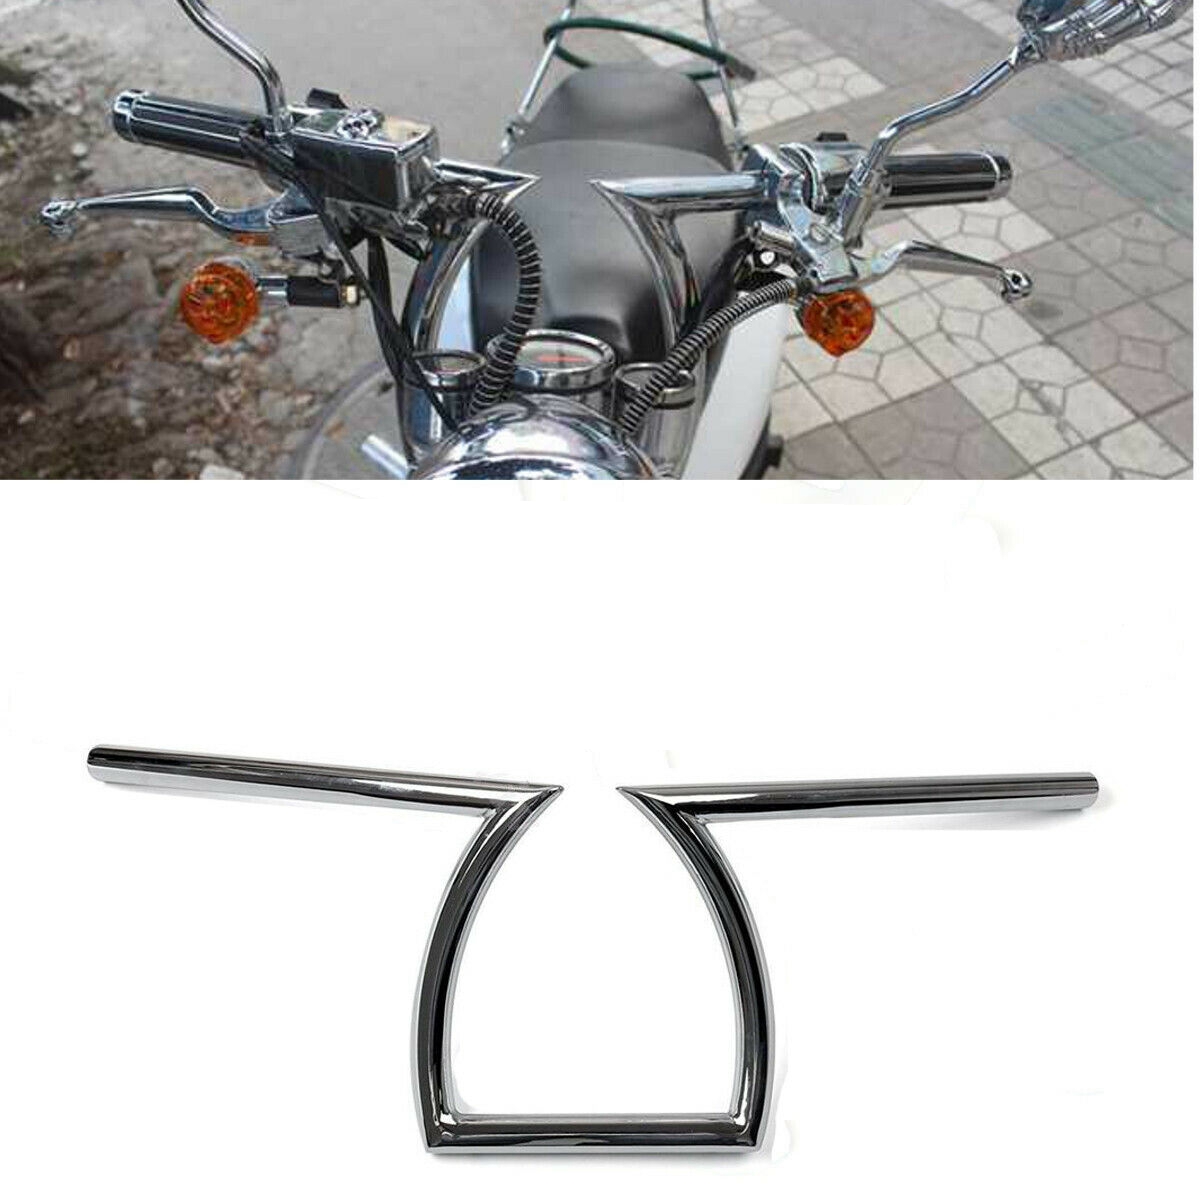 Wholesale 22mm 7/8 inches 25mm 1inch Motorcycle Drag Handlebars Z Bars